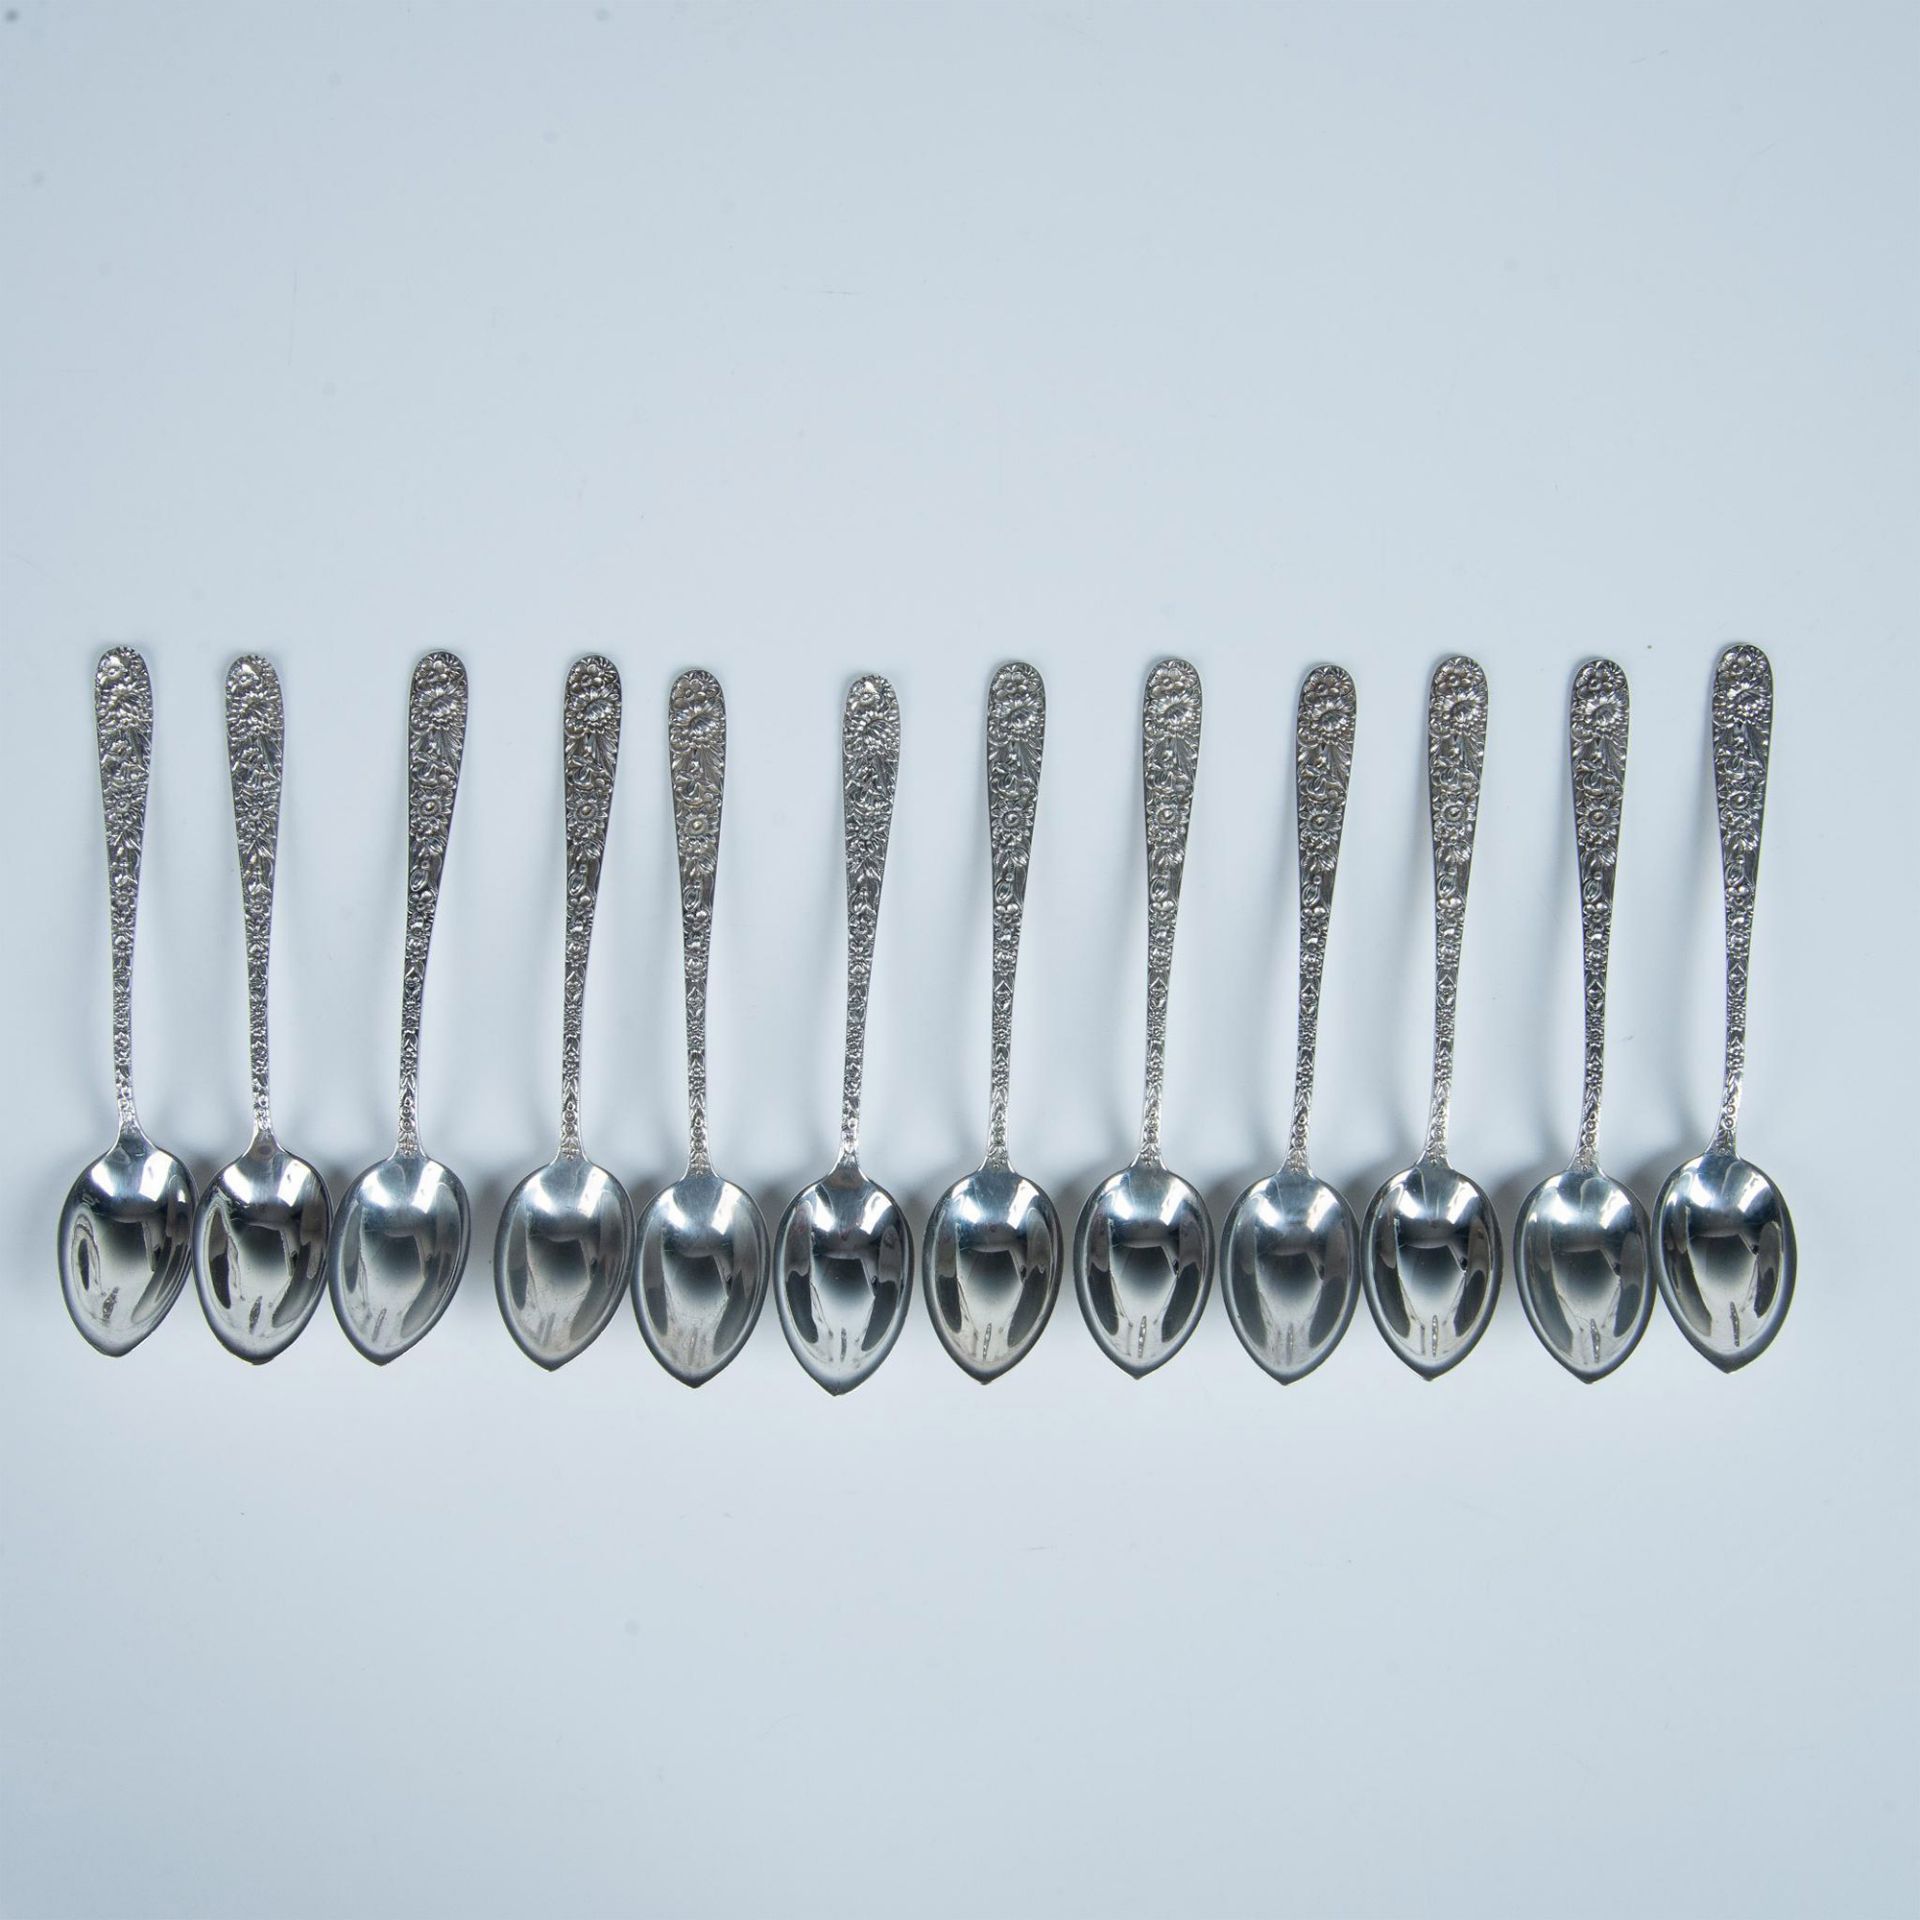 12pc S. Kirk & Son Sterling Silver Repousse Teaspoons - Image 2 of 12